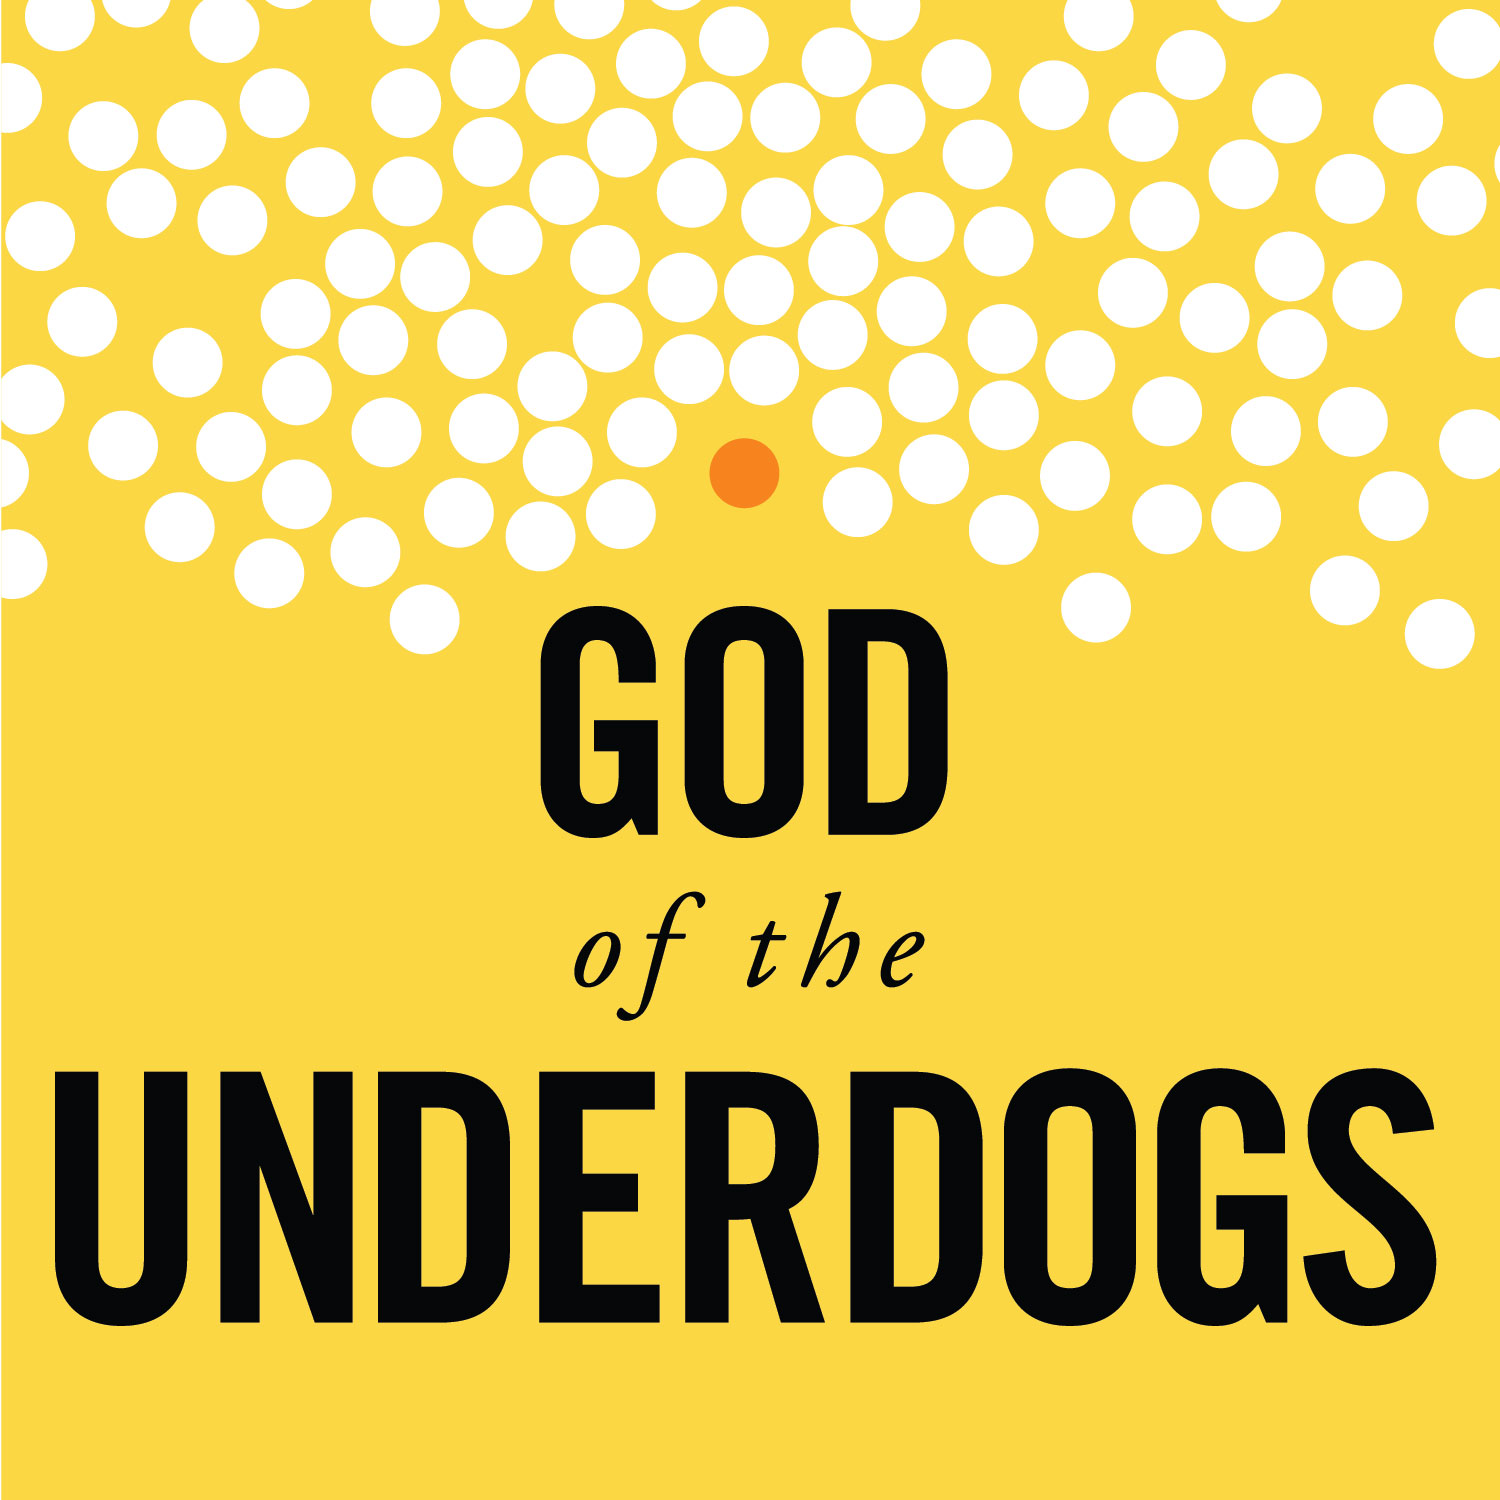 God of the Underdogs - Your Potential (Week 2)